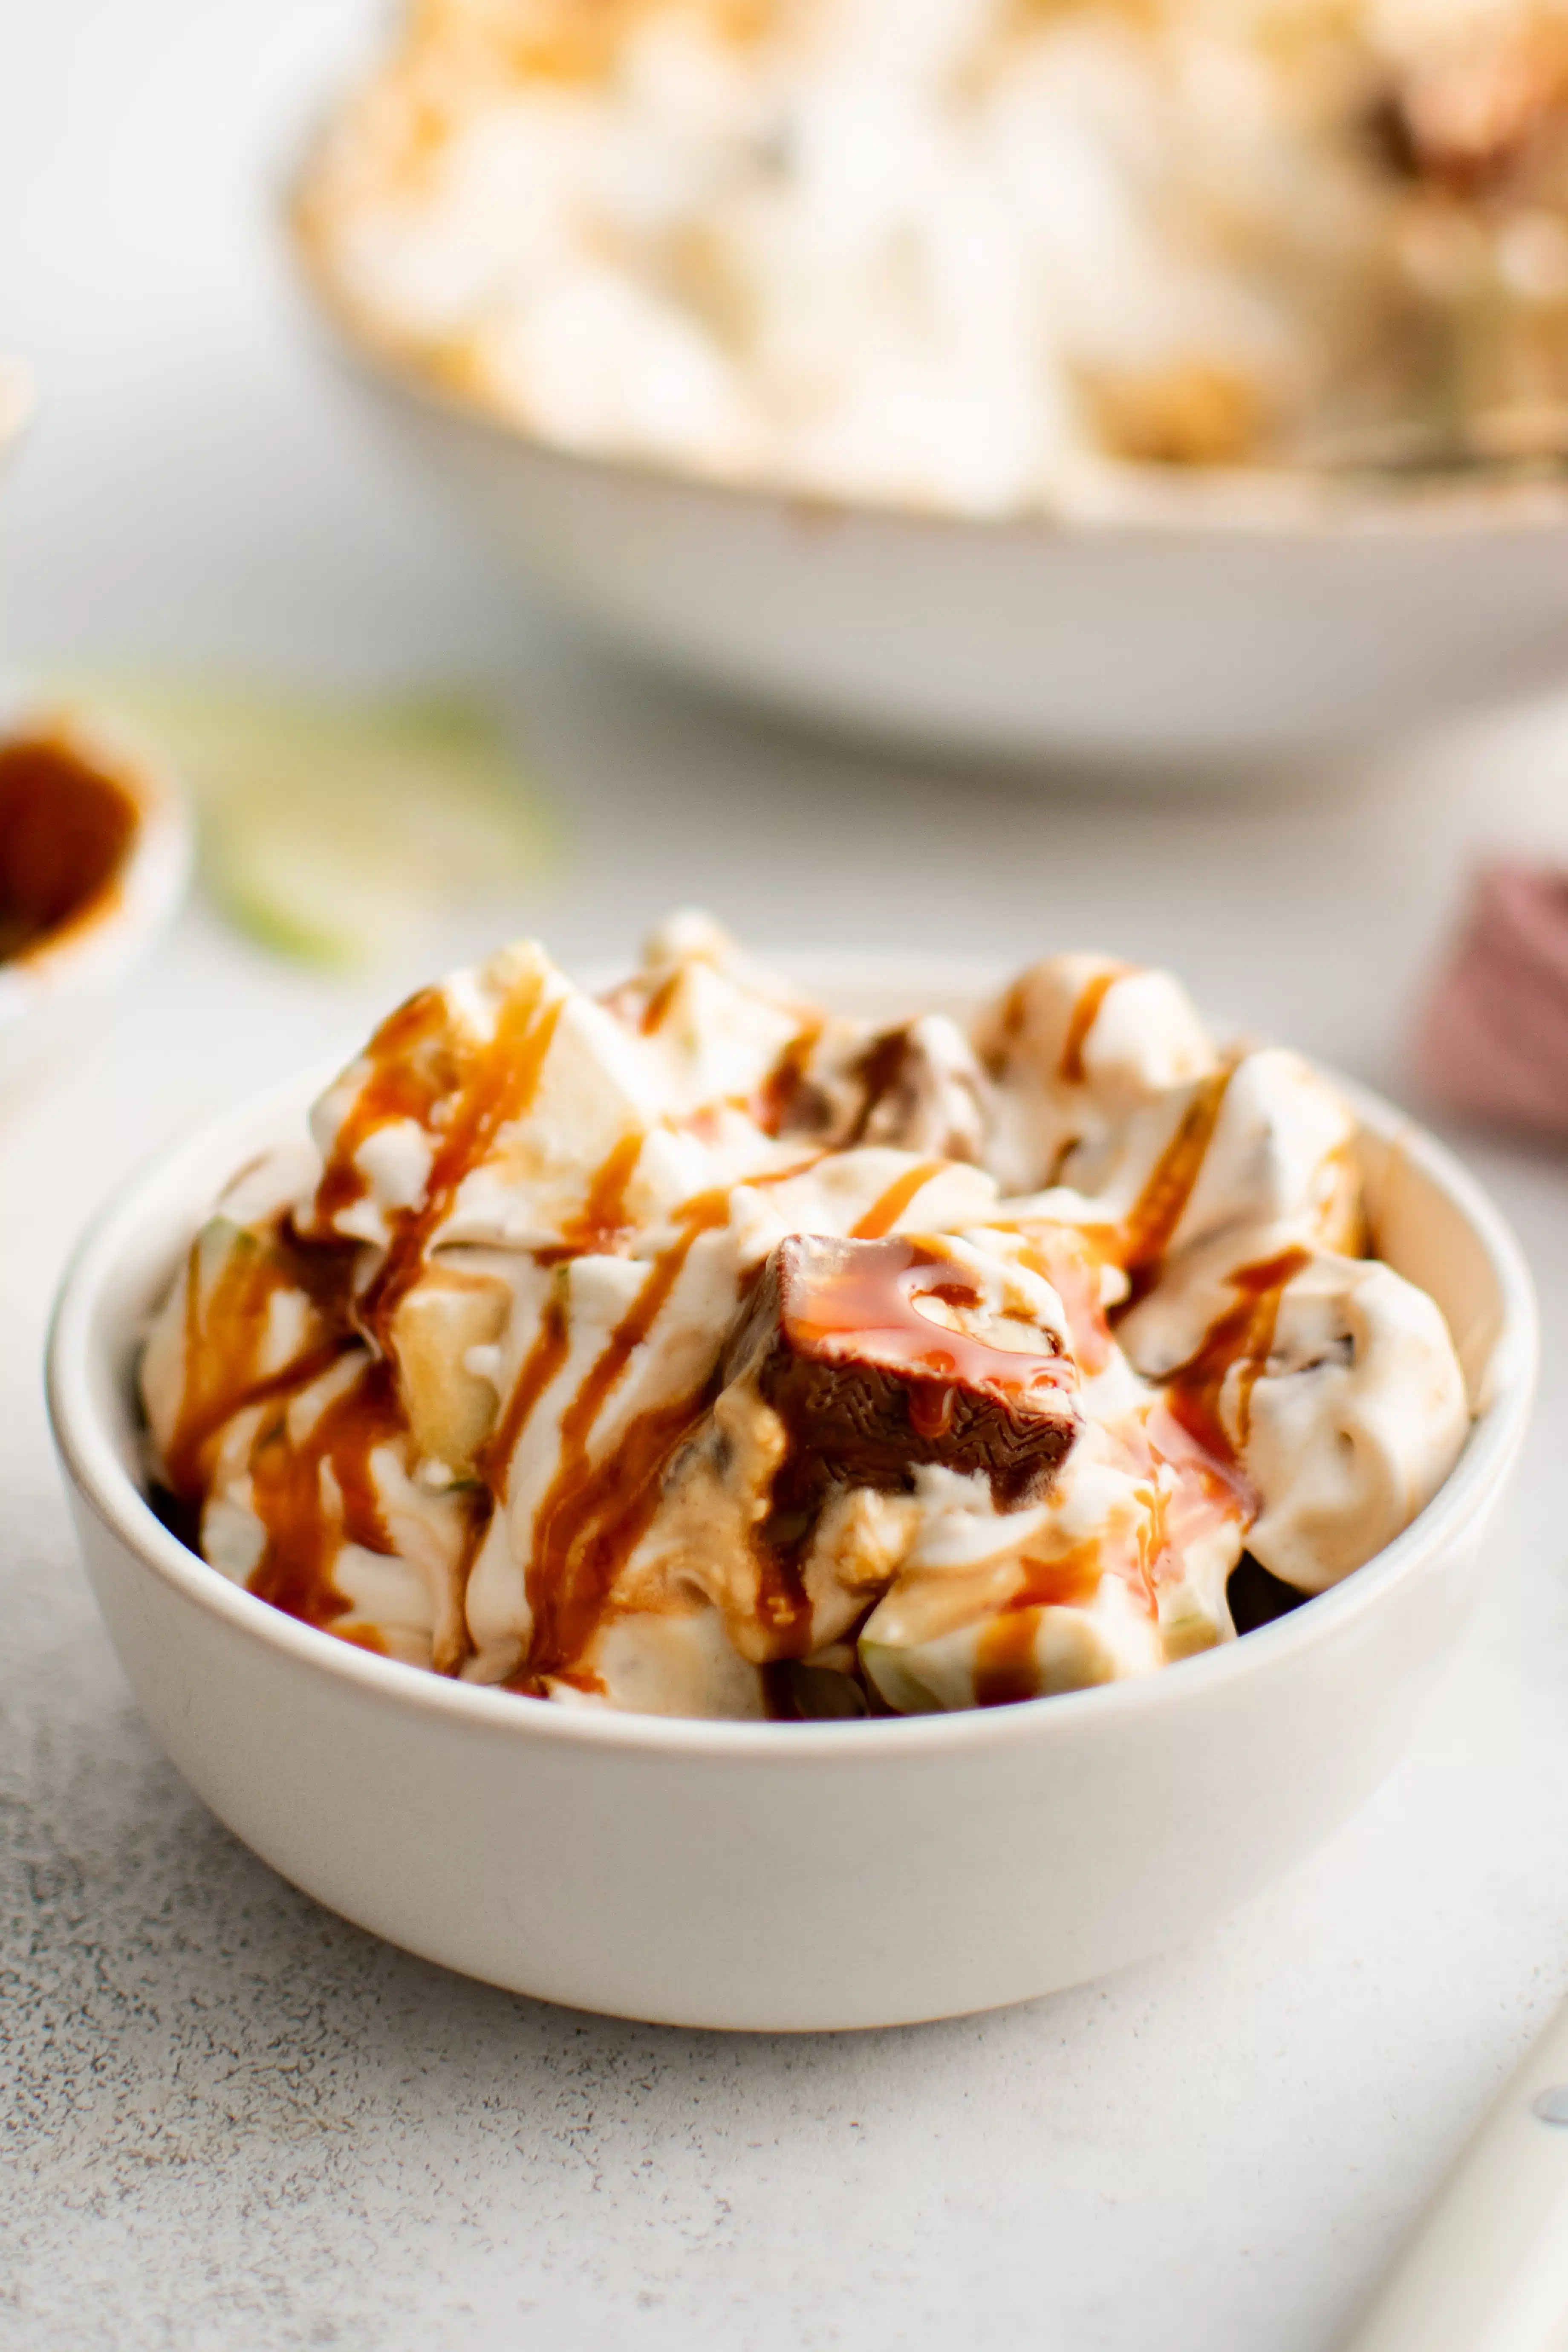 Small dessert bowl filled with Snickers salad drizzled with caramel sauce.